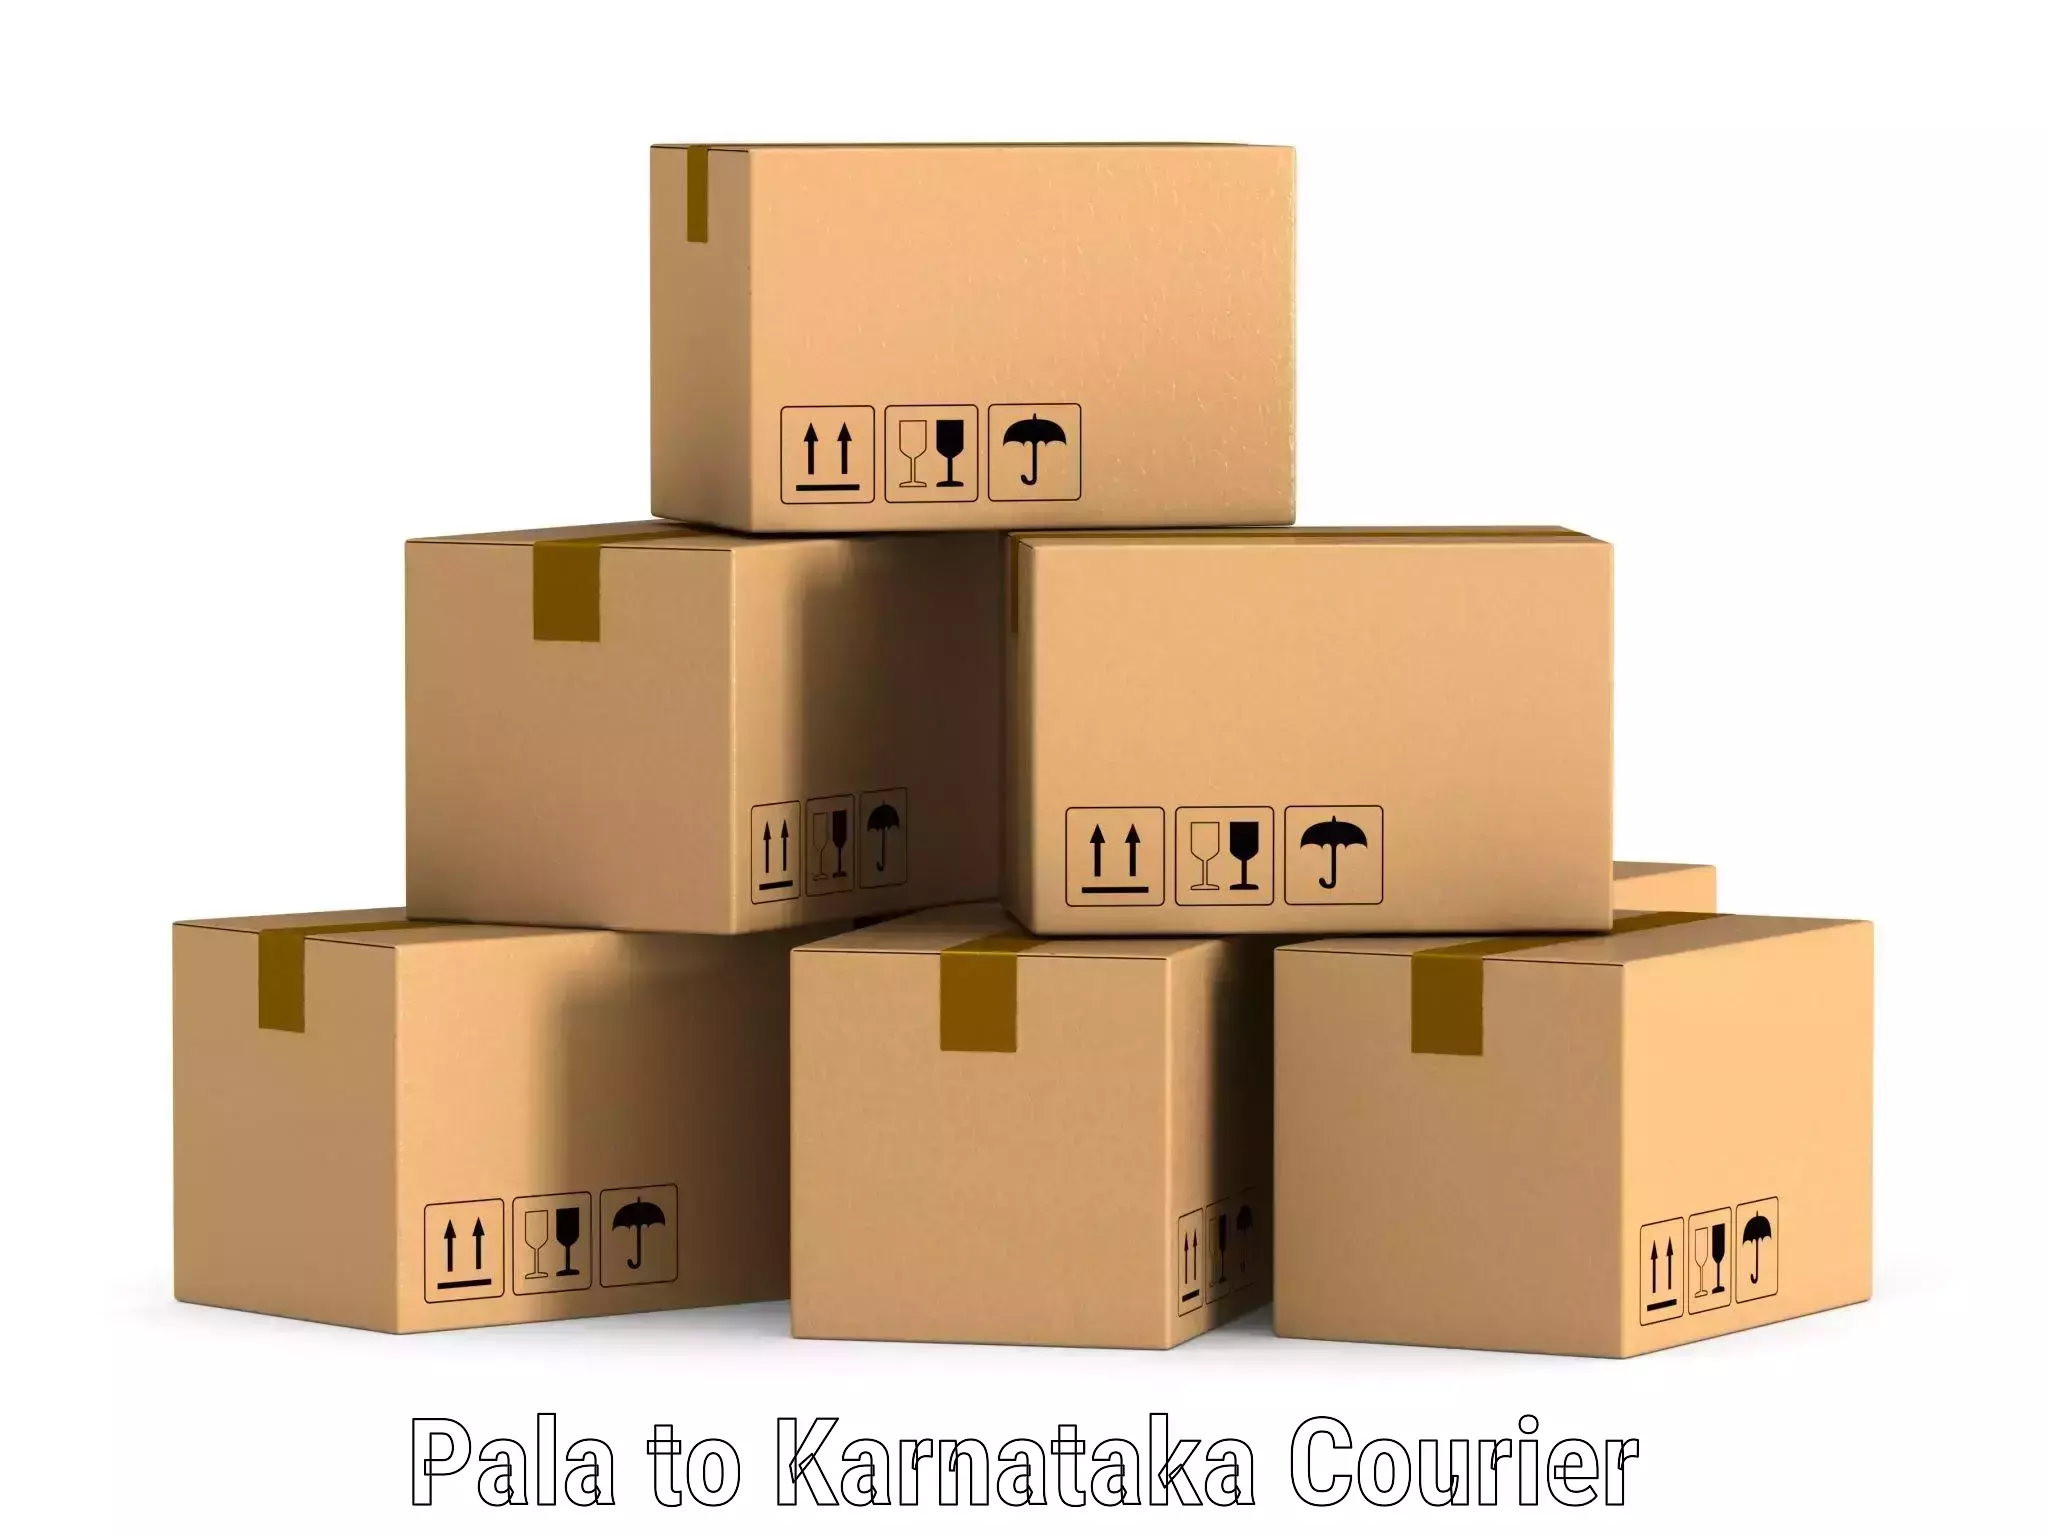 Delivery service partnership in Pala to Yadgiri